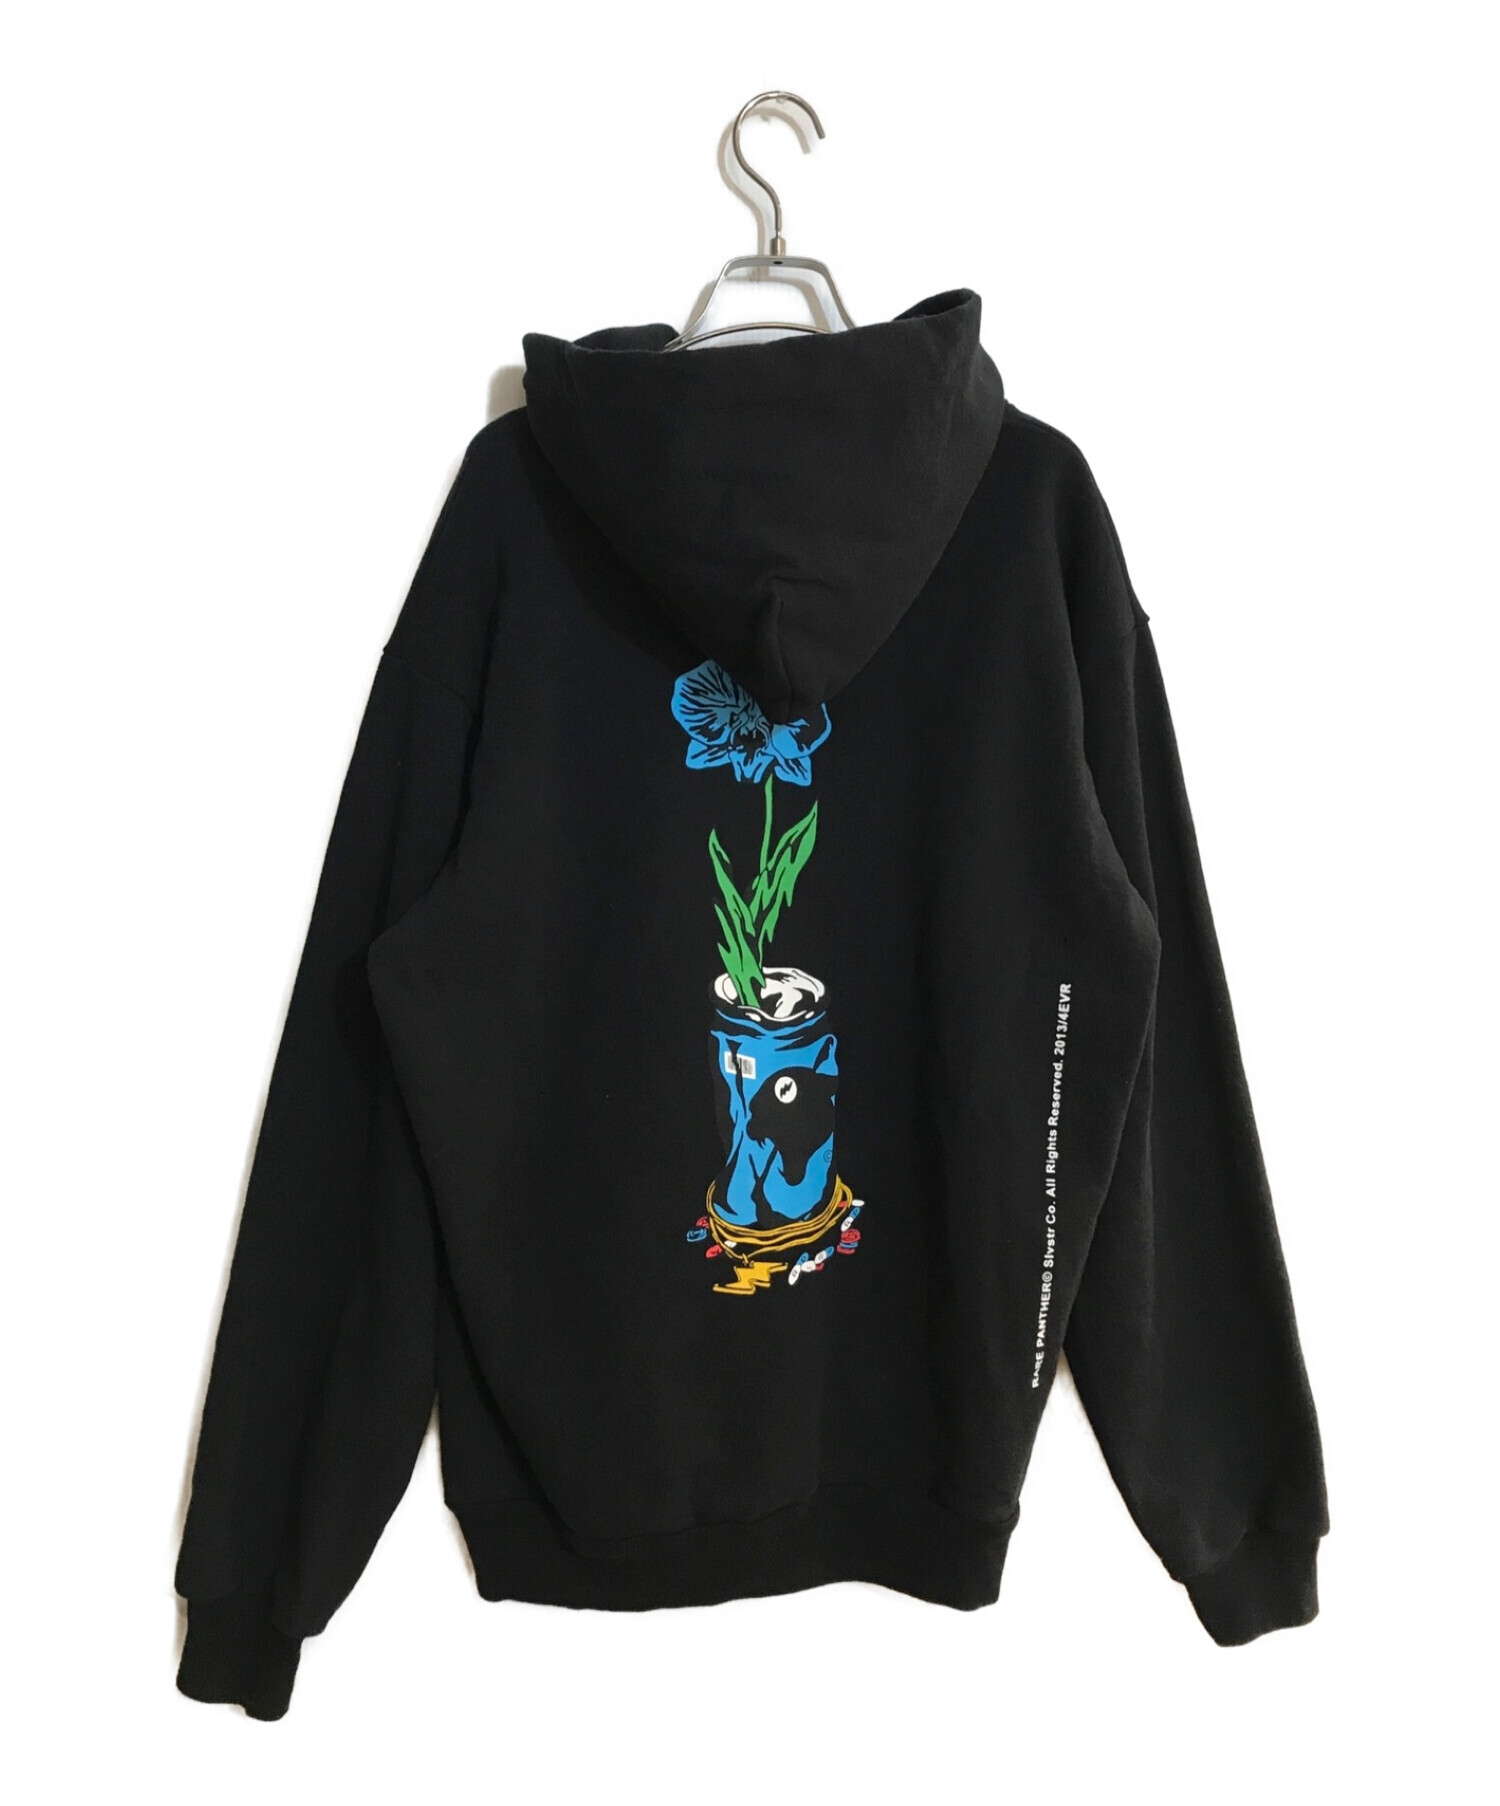 wasted youth rare panther hoodie Mサイズ